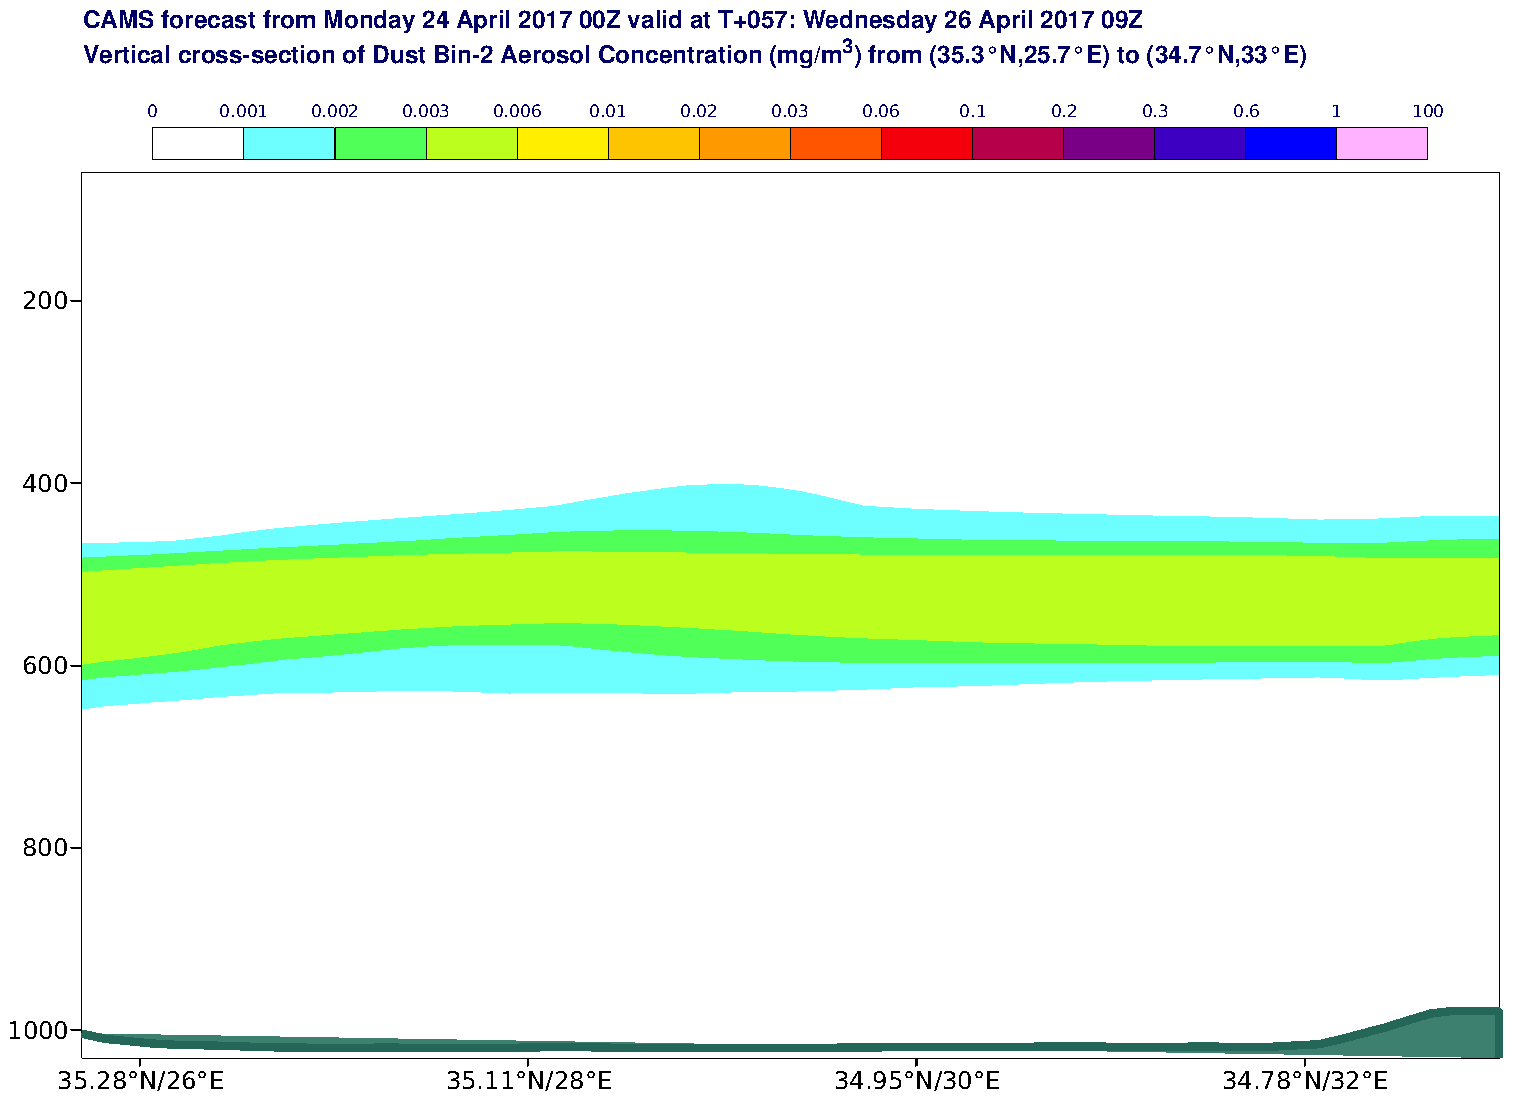 Vertical cross-section of Dust Bin-2 Aerosol Concentration (mg/m3) valid at T57 - 2017-04-26 09:00